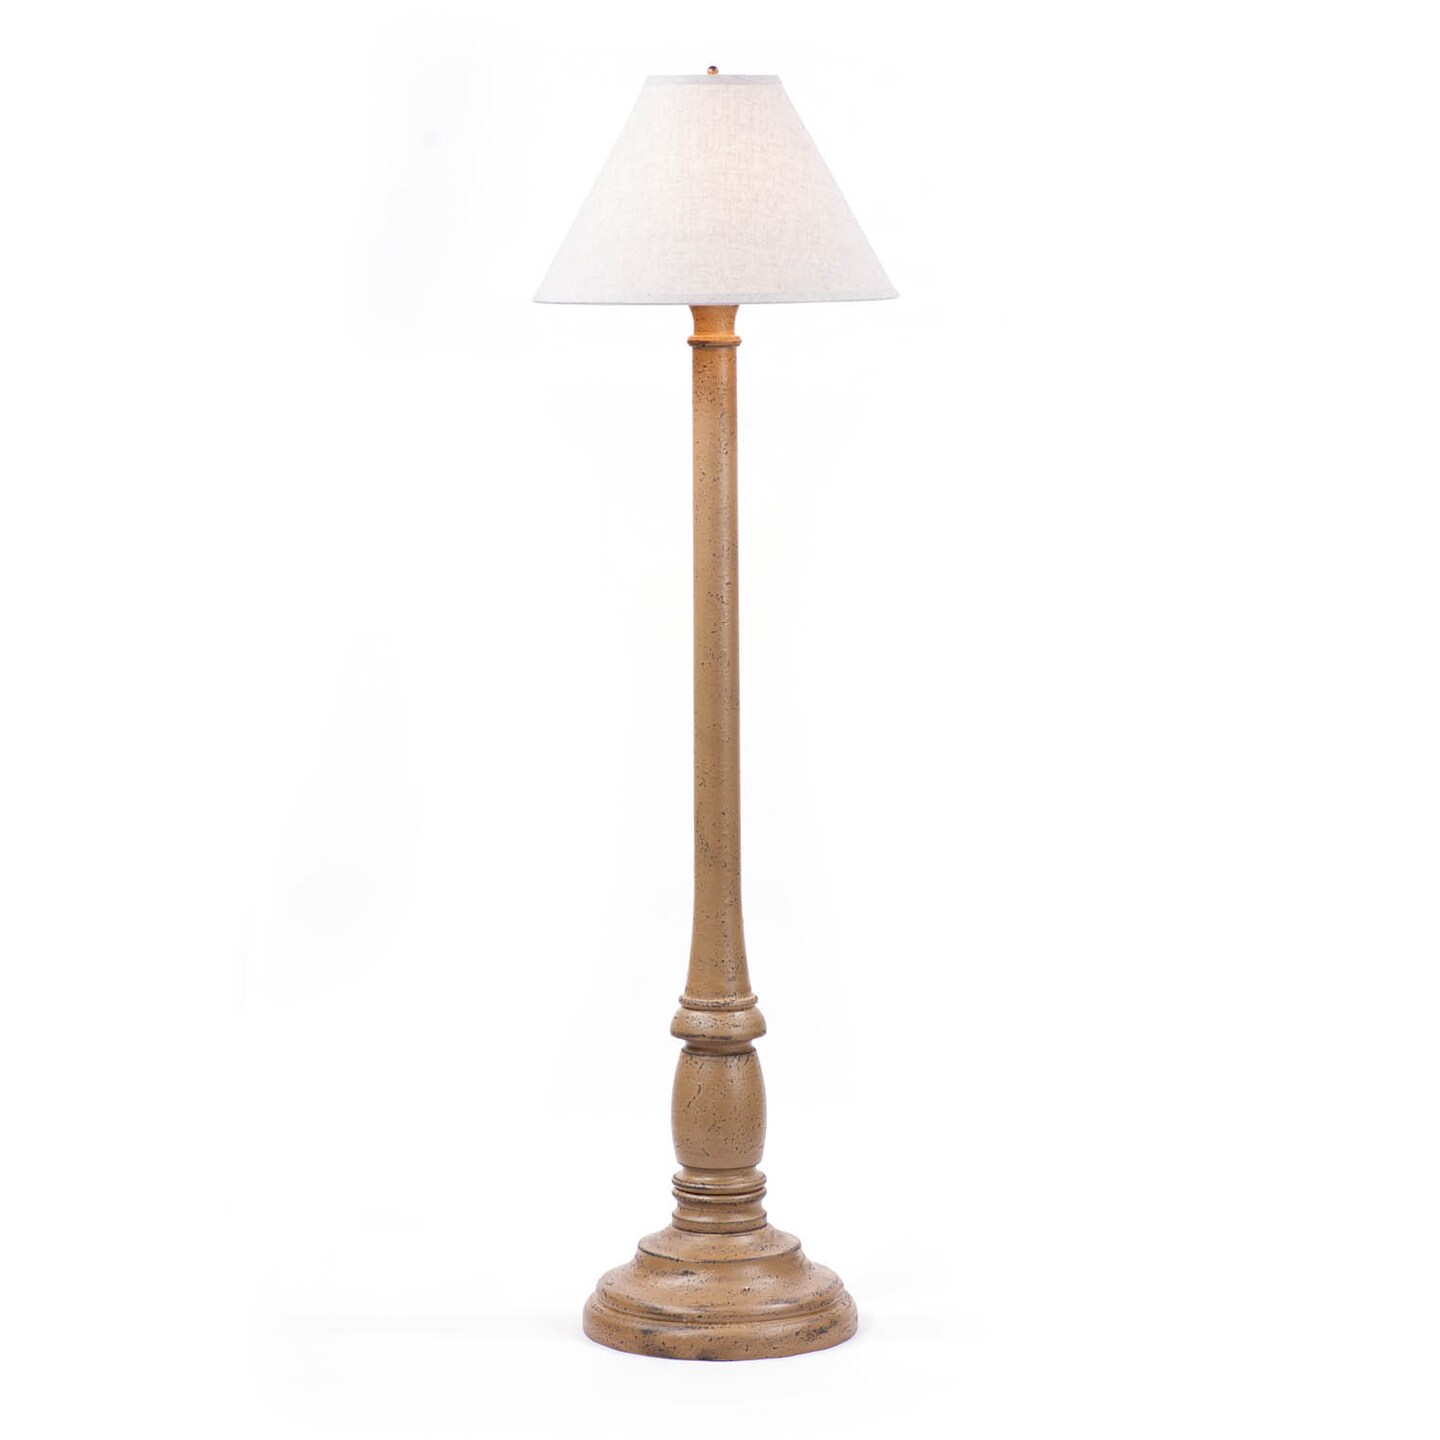 Brinton House Floor Lamp in Pearwood with Shade